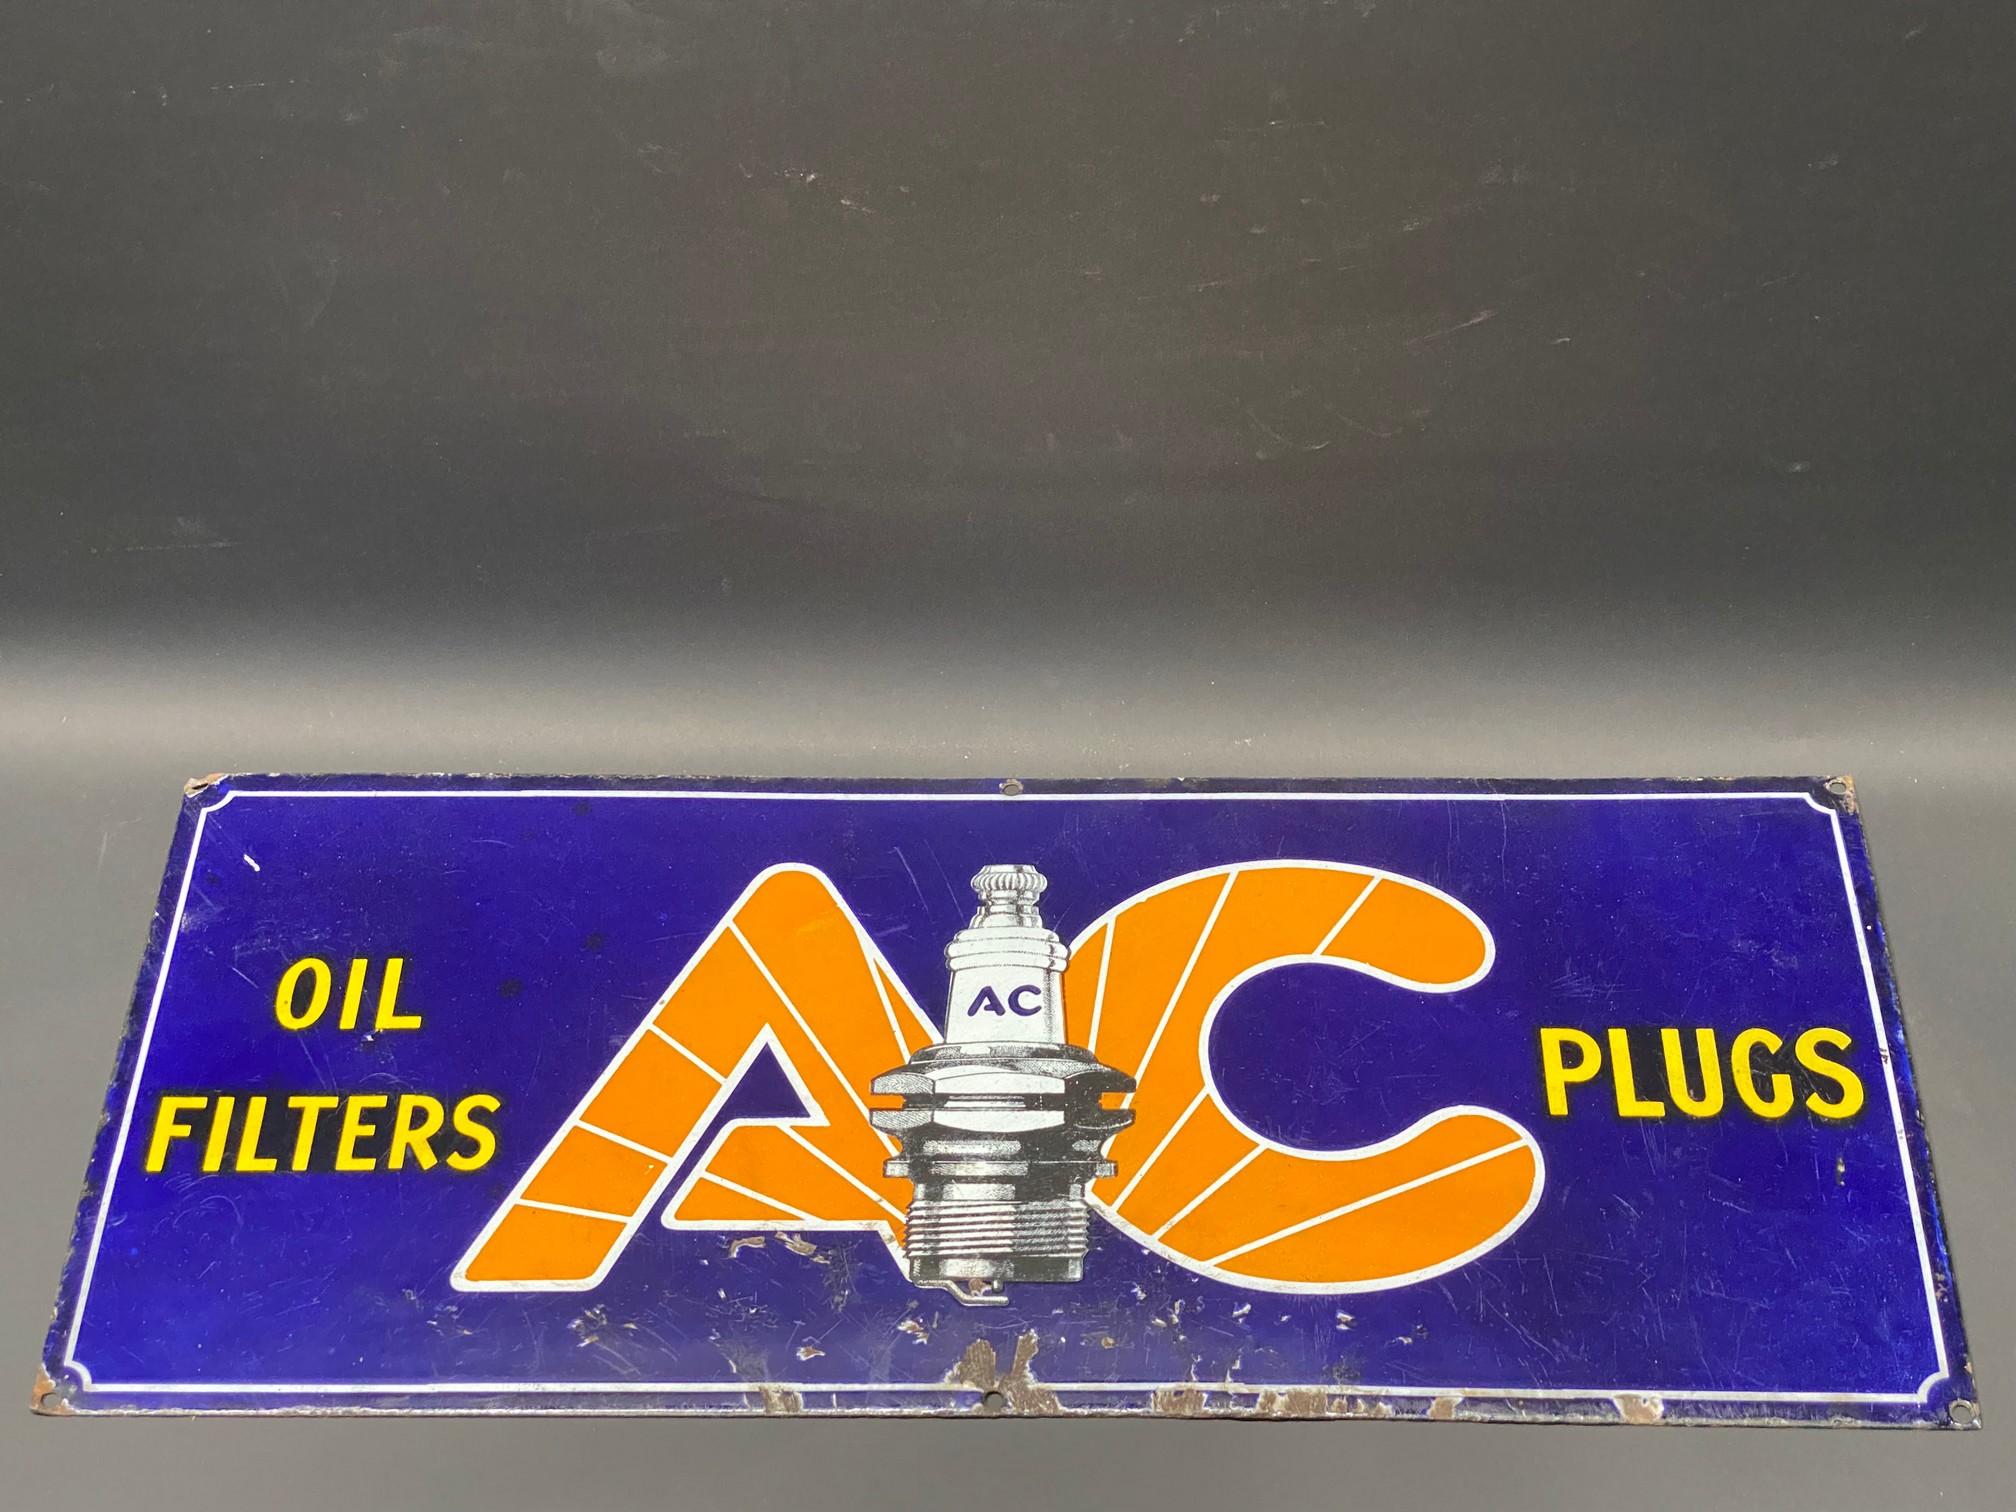 An AC Oil Filters and Plugs rectangular enamel sign, 21 x 9".